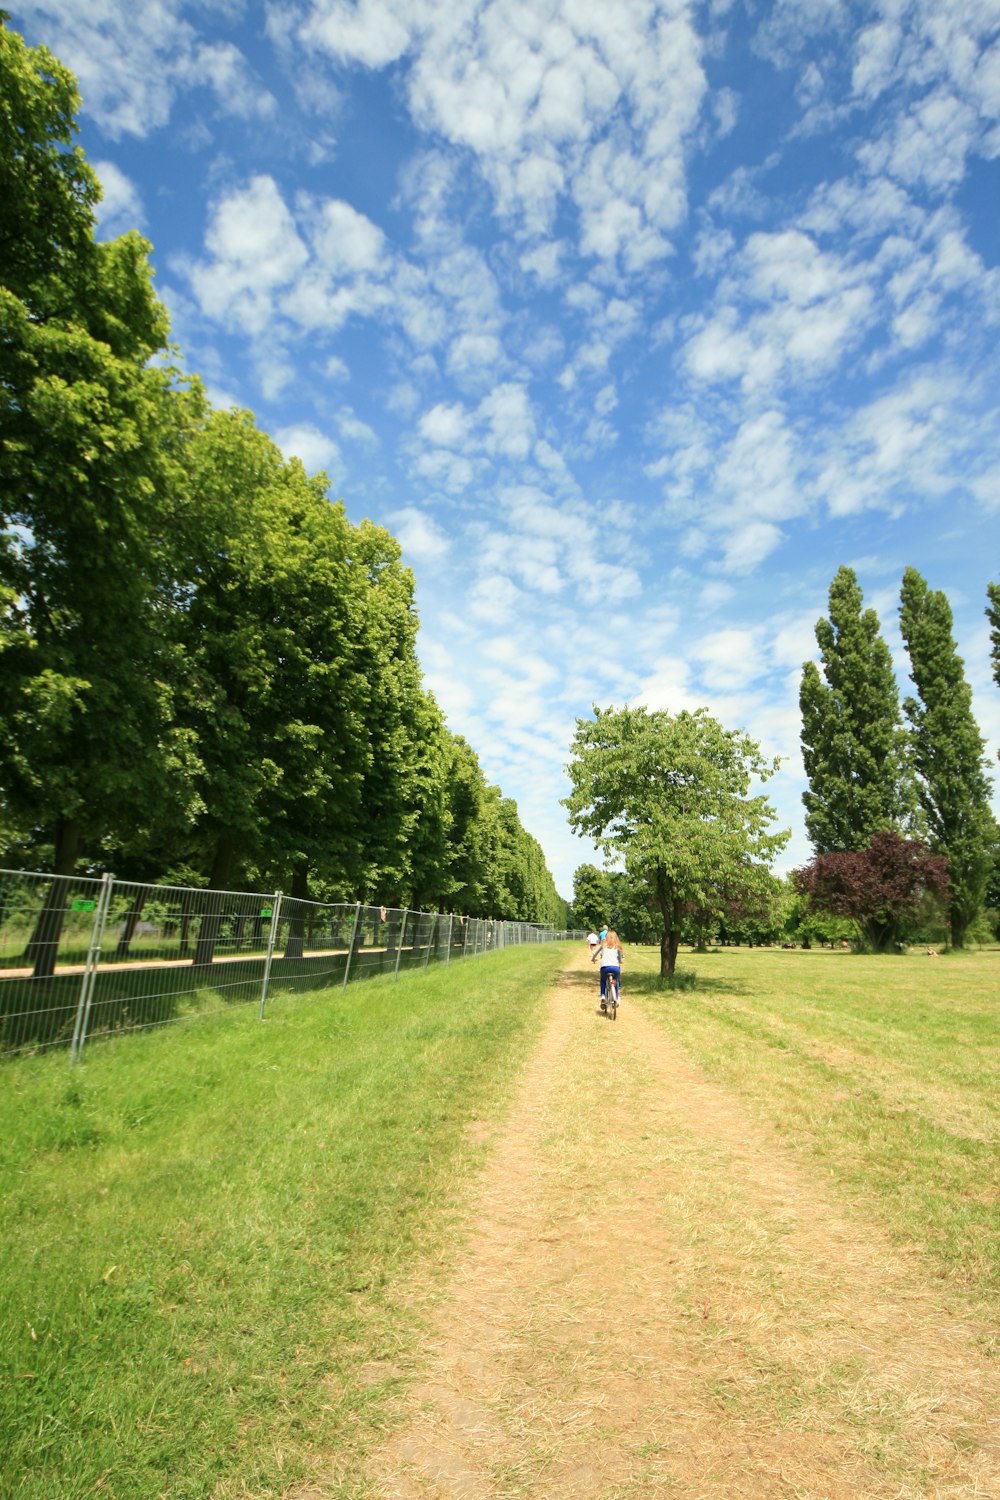 person in black shirt walking on dirt road between green trees under blue sky during daytime